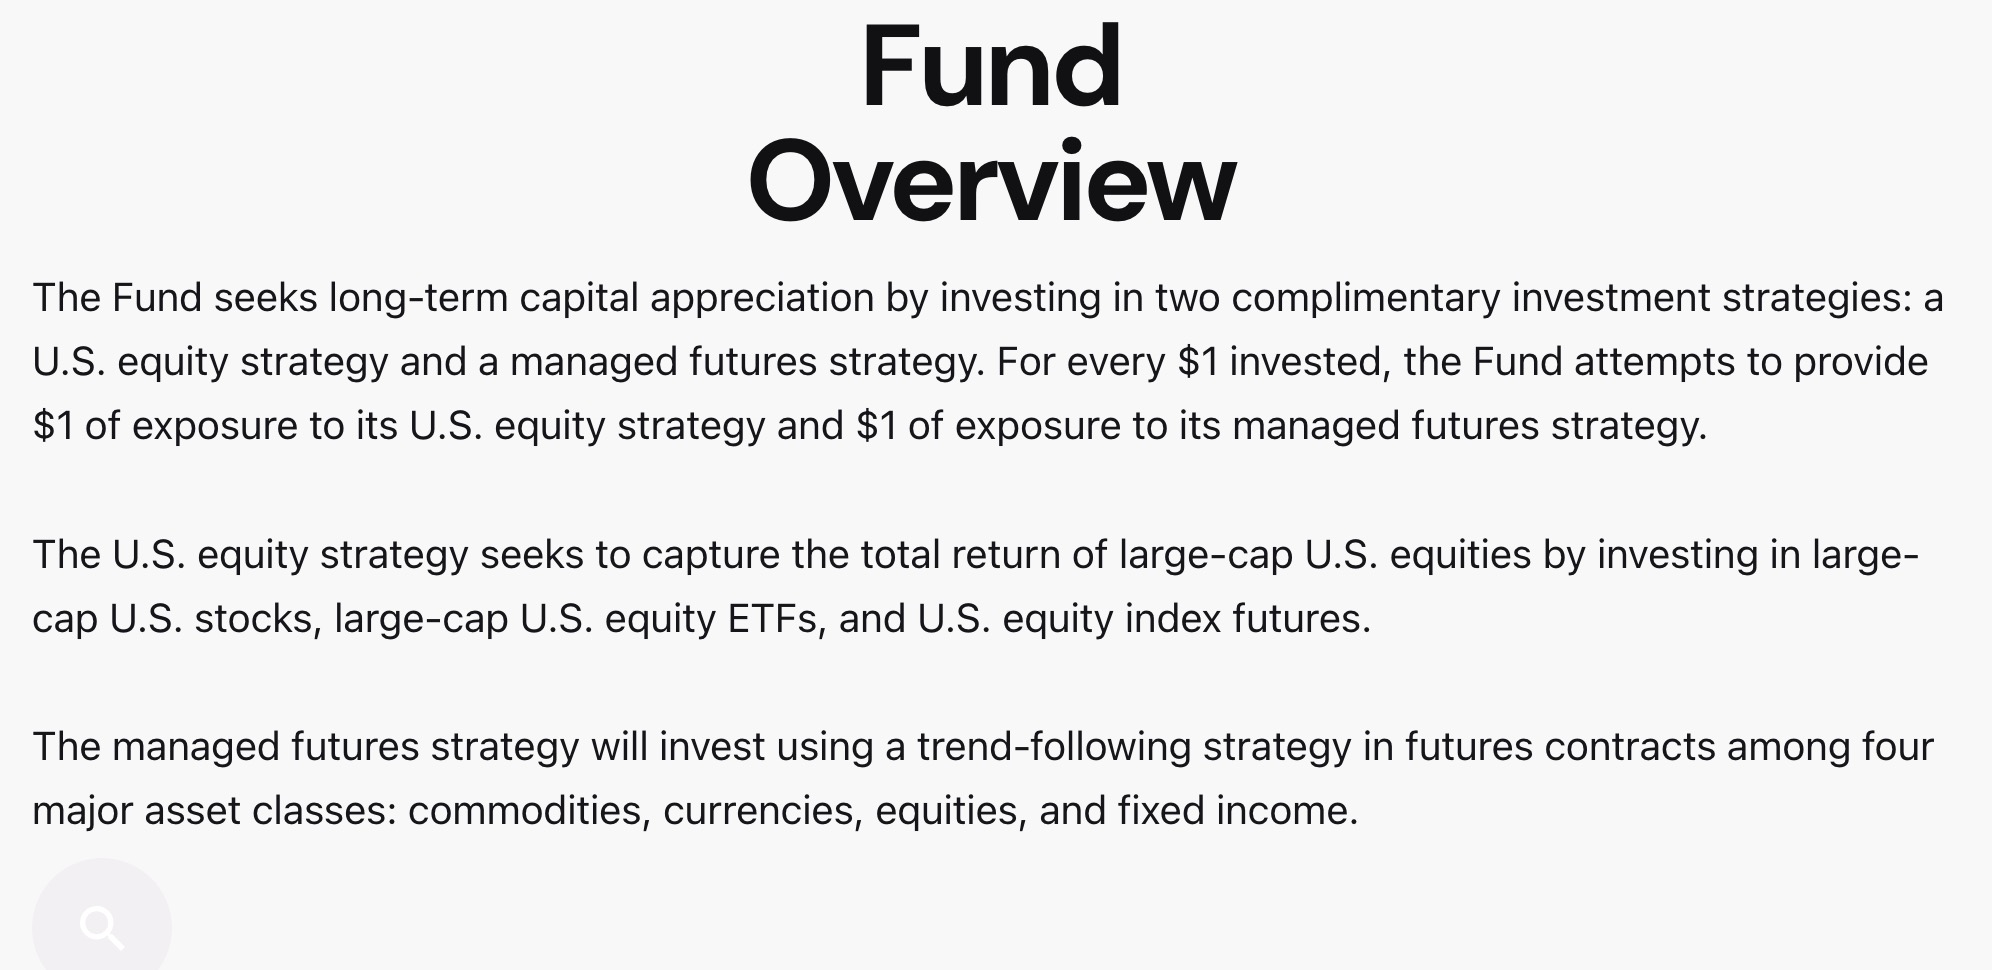 RSST ETF Fund Over: Return Stacked US Stocks & Managed Futures $1 invested providing $1 exposure to equities and $1 exposure to managed futures